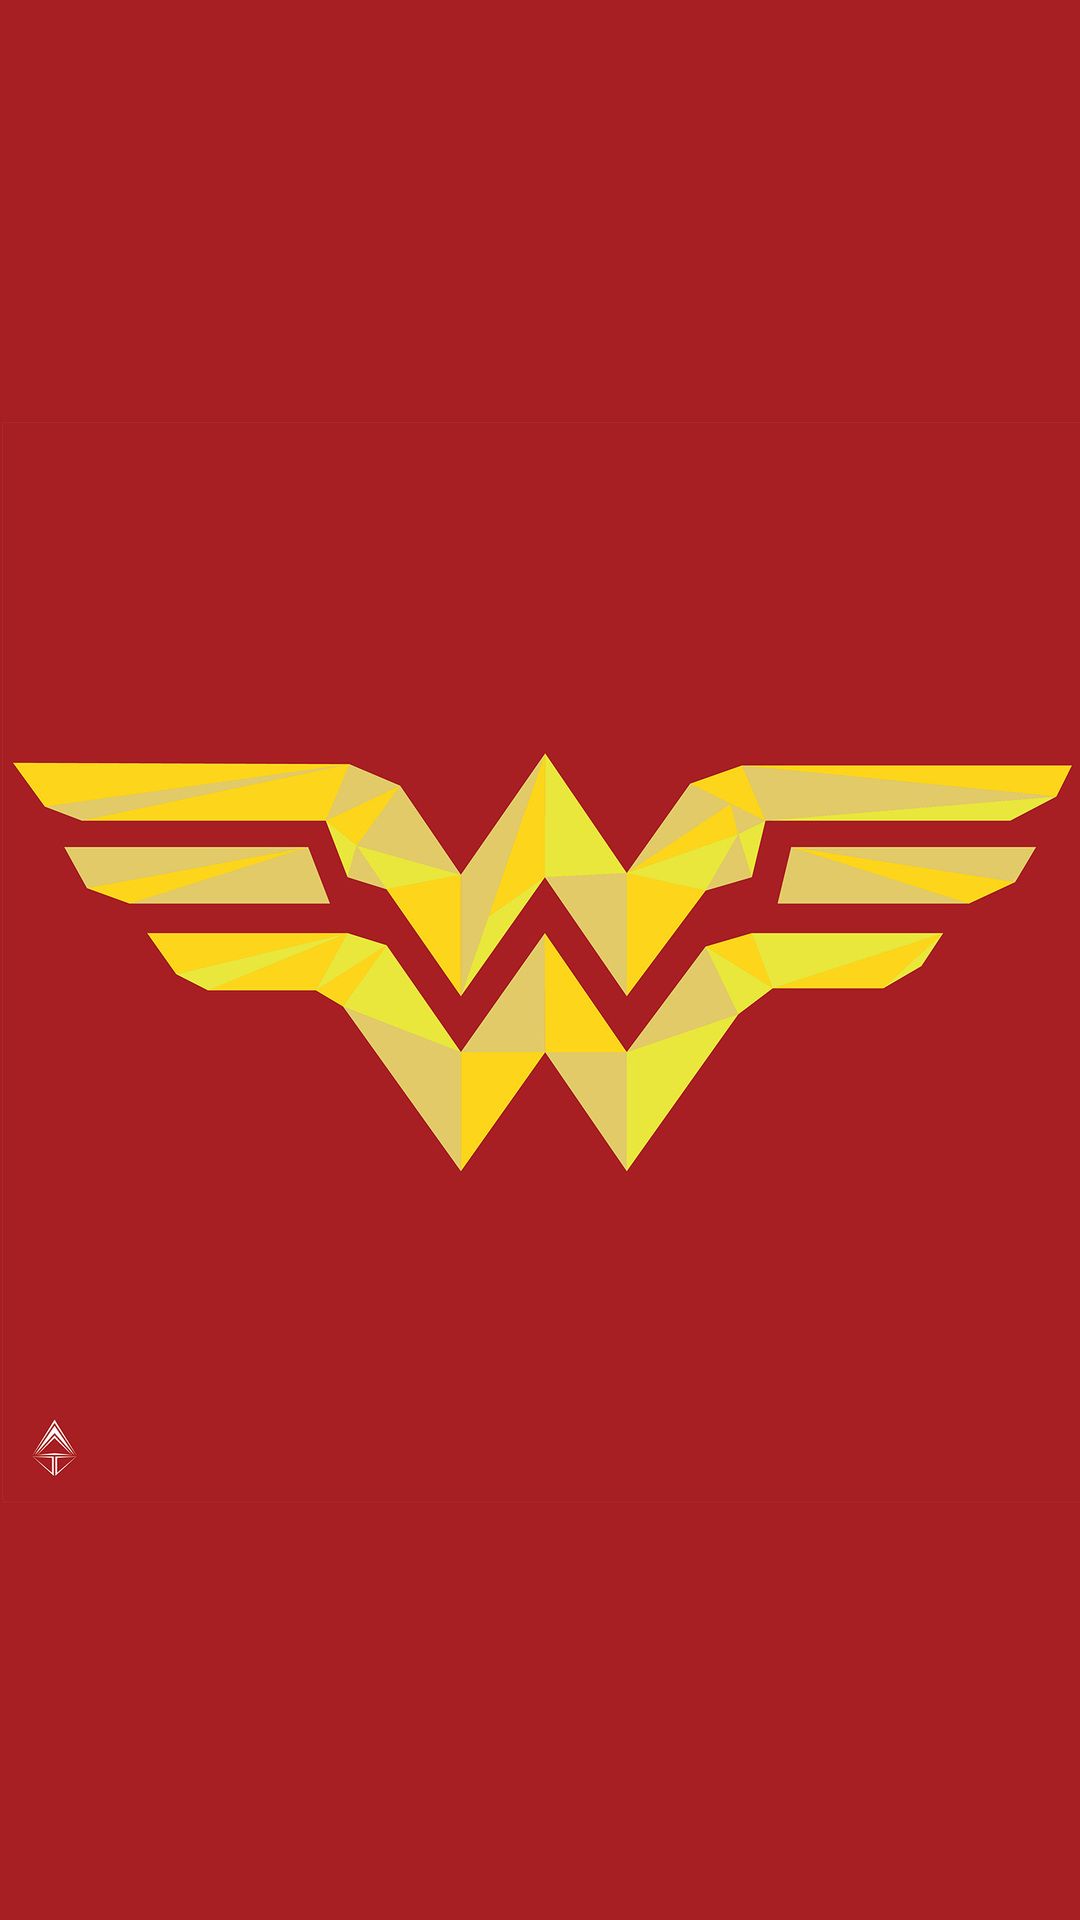 Wonder Woman Logo 4k Artwork iPhone 6s, 6 Plus, Pixel xl , One Plus 3t, 5 HD 4k Wallpaper, Image, Background, Photo and Picture